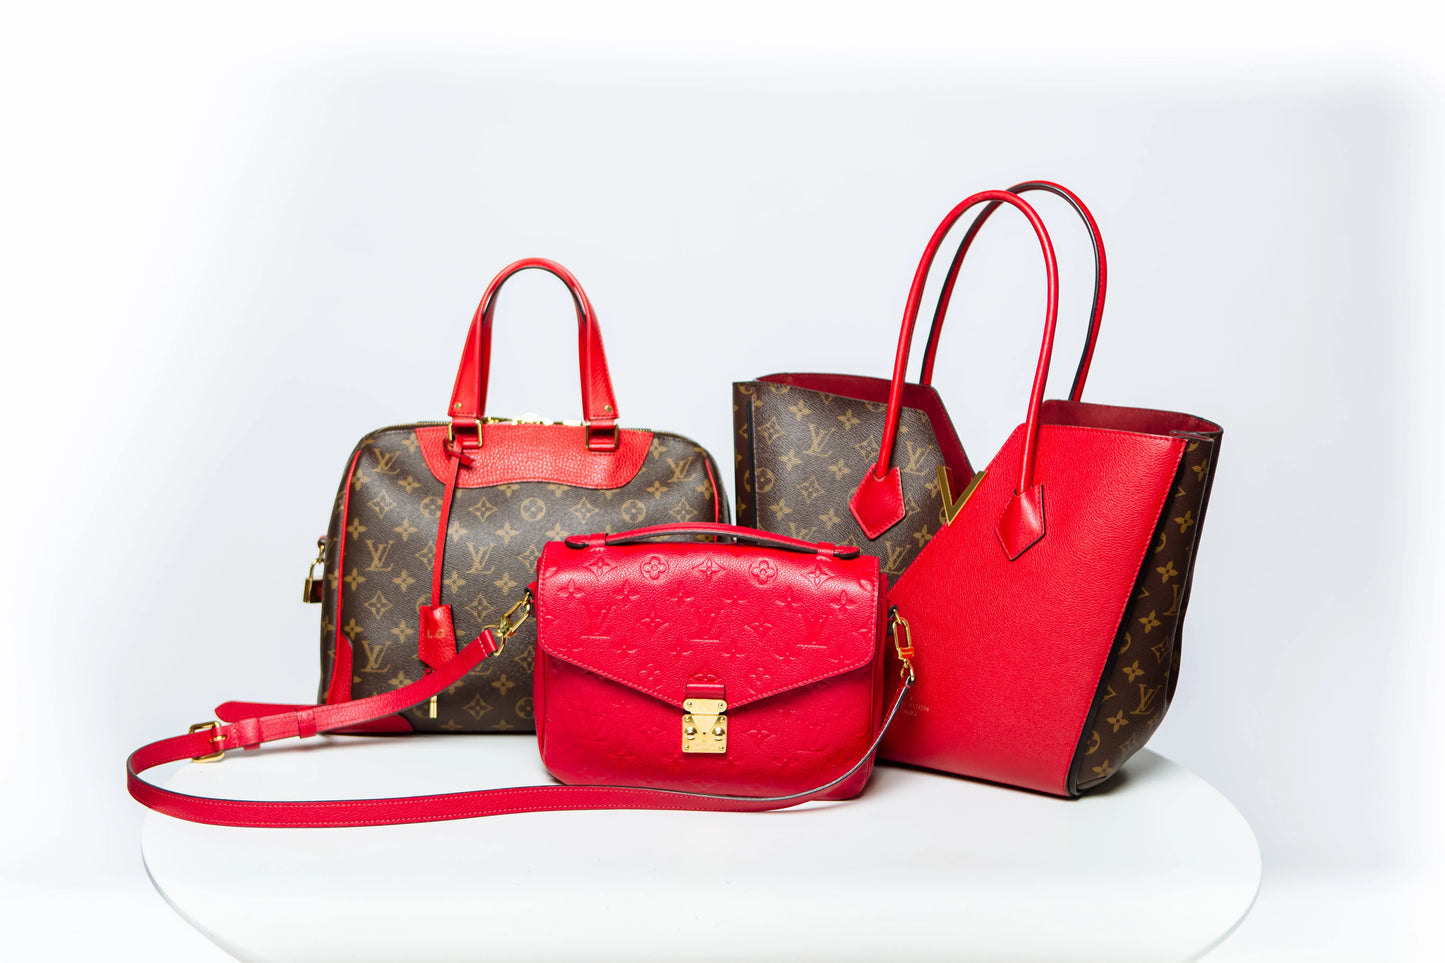 Top 10 Red Louis Vuitton Purses: Where To Buy a Red Designer Purse ...